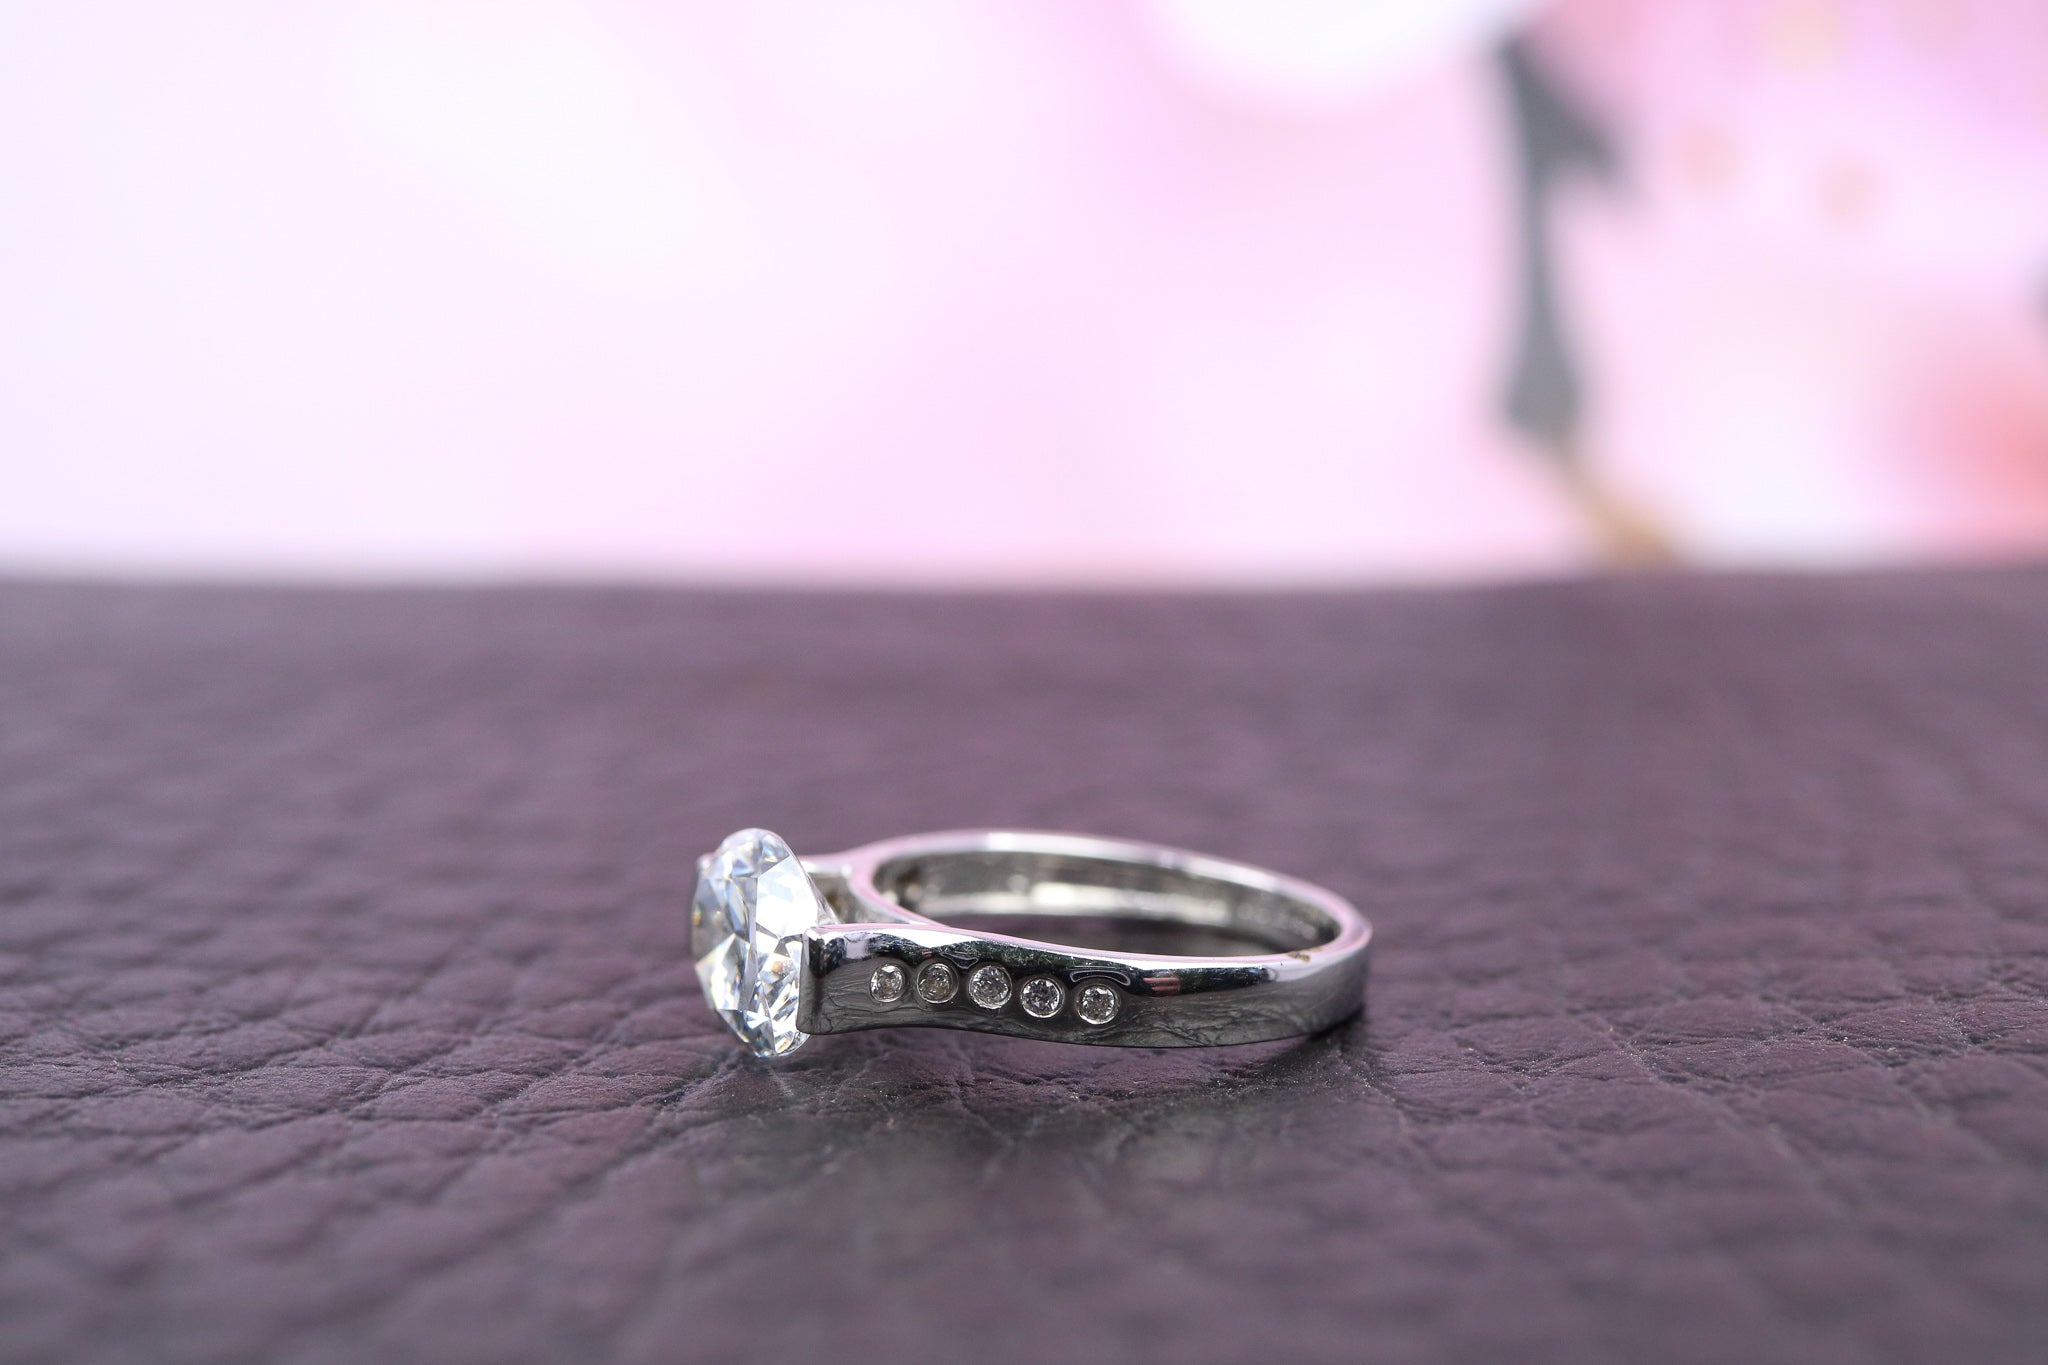 14ct White Gold & Cubic Zirconia Ring - HJ2465 - Hallmark Jewellers Formby & The Jewellers Bench Widnes